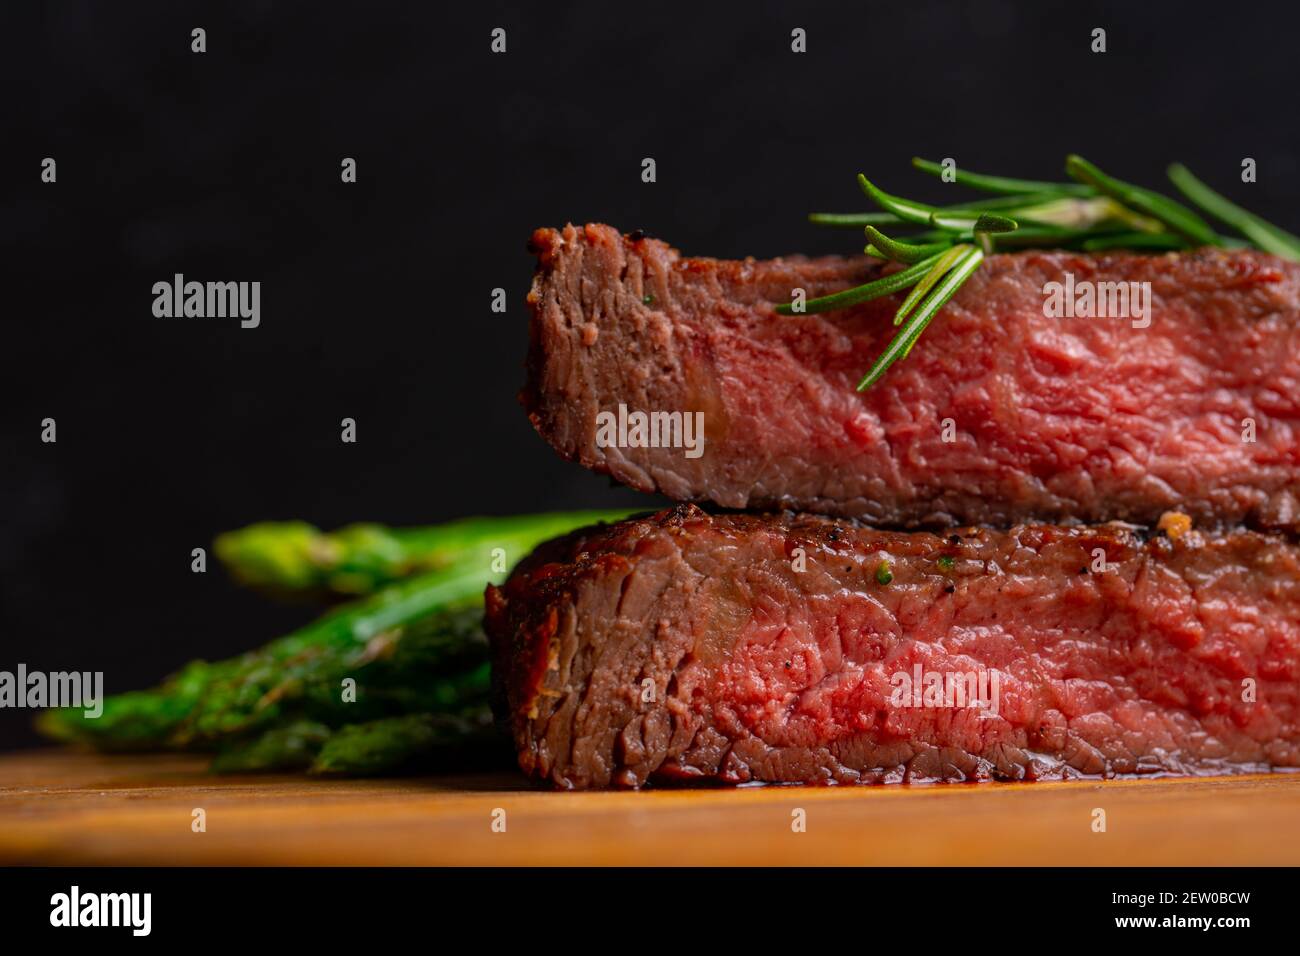 grilled venison fillet on wooden table close up Stock Photo